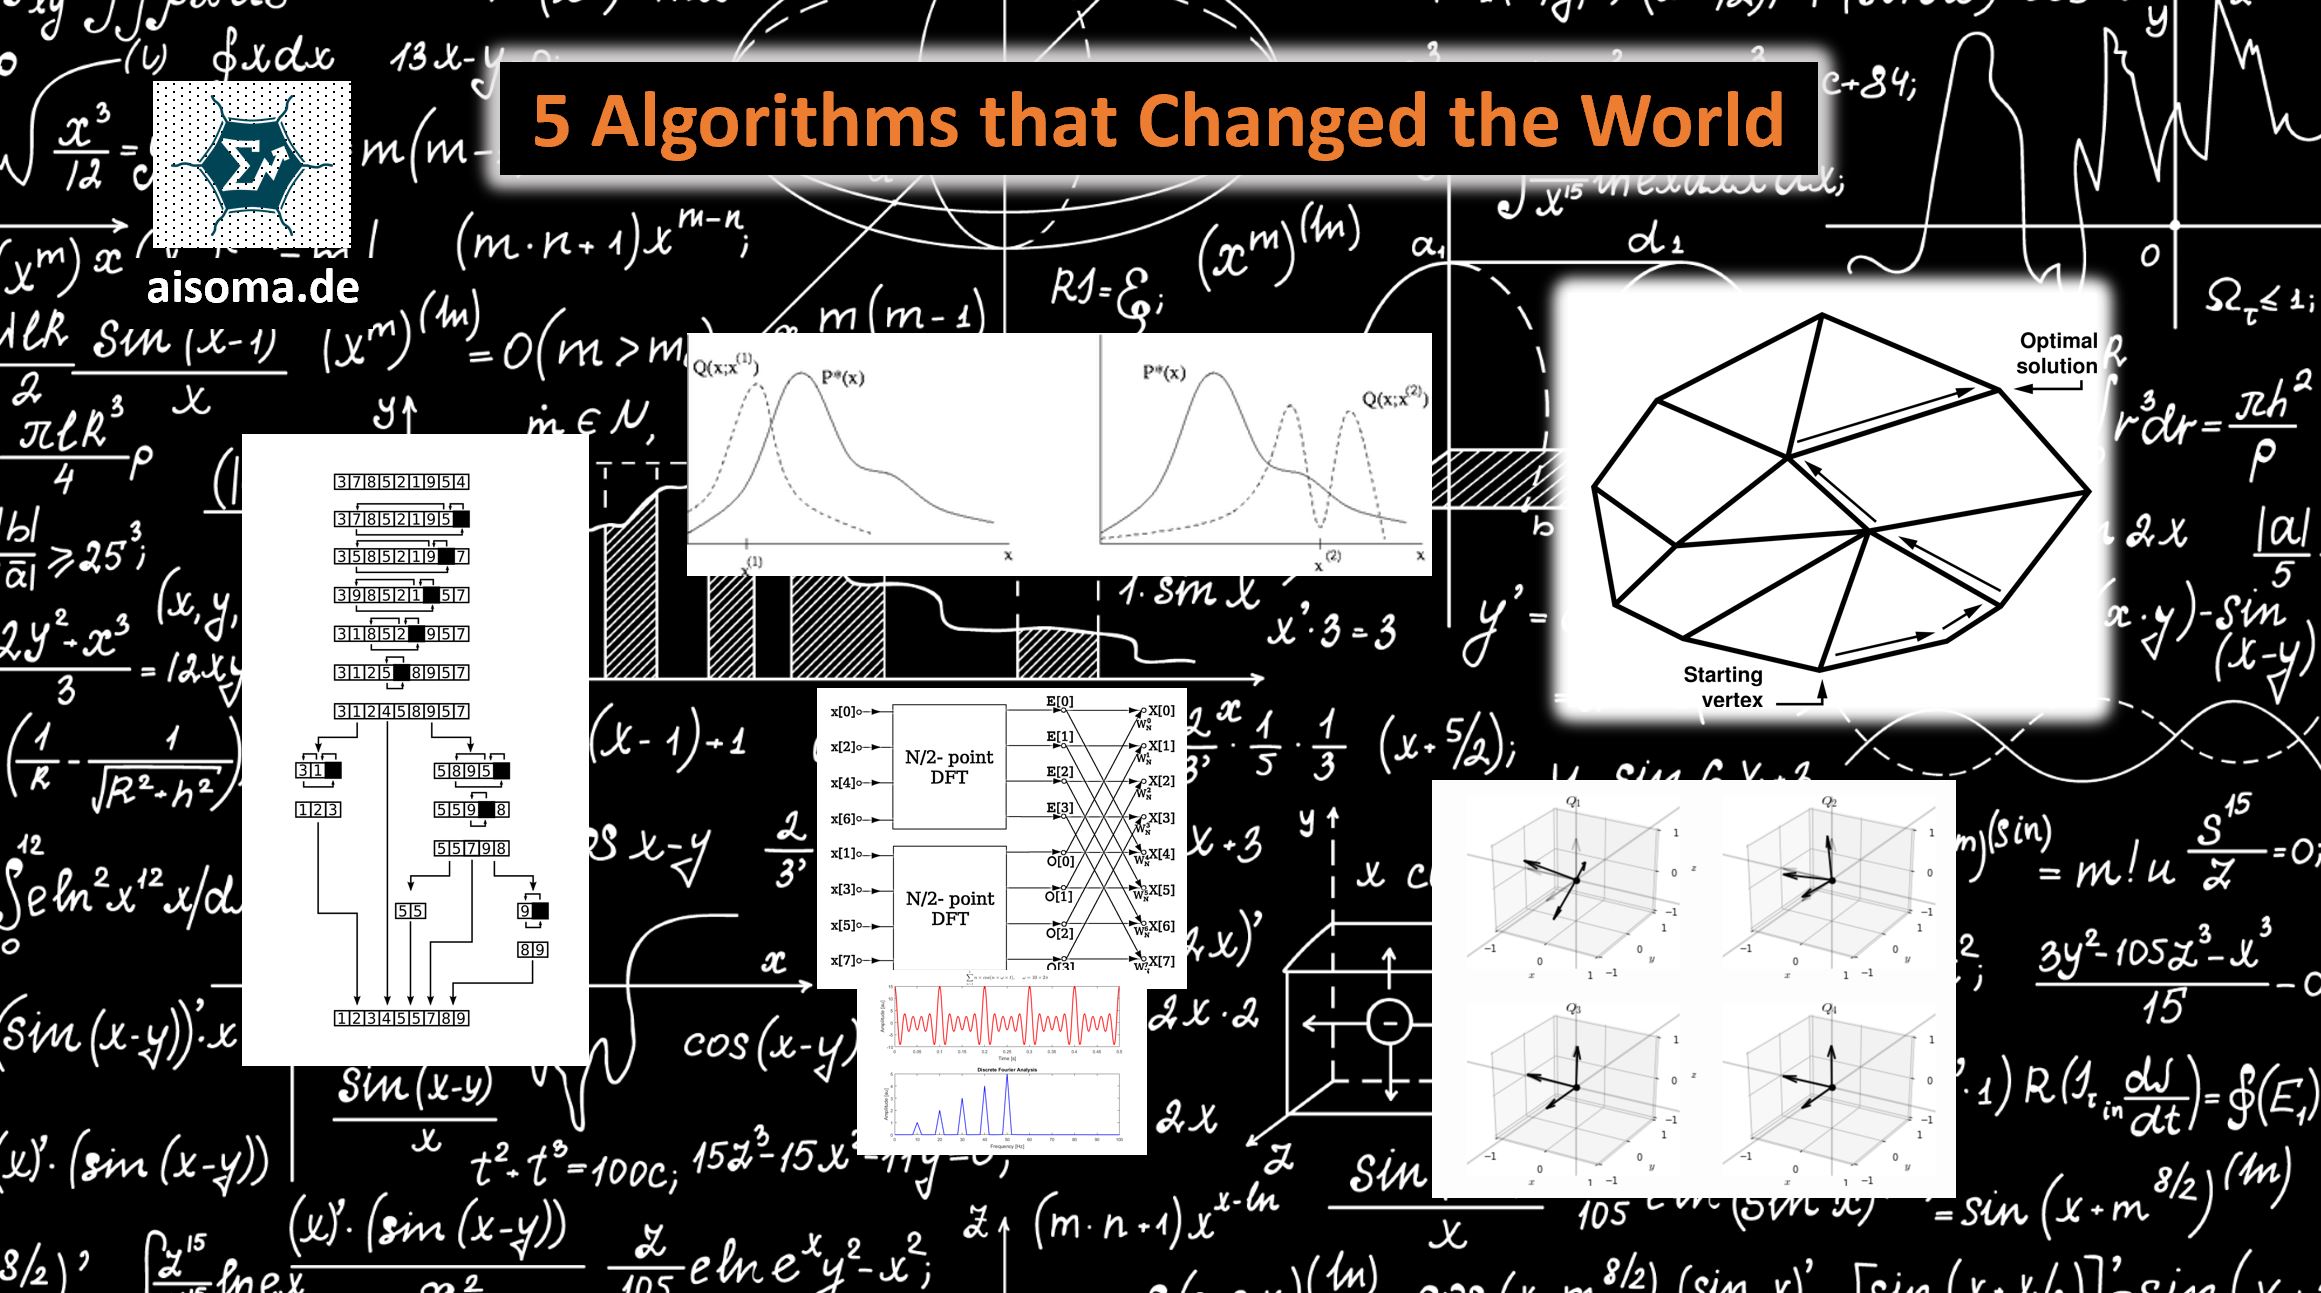 AISOMA -5 Algorithms that Changed the World